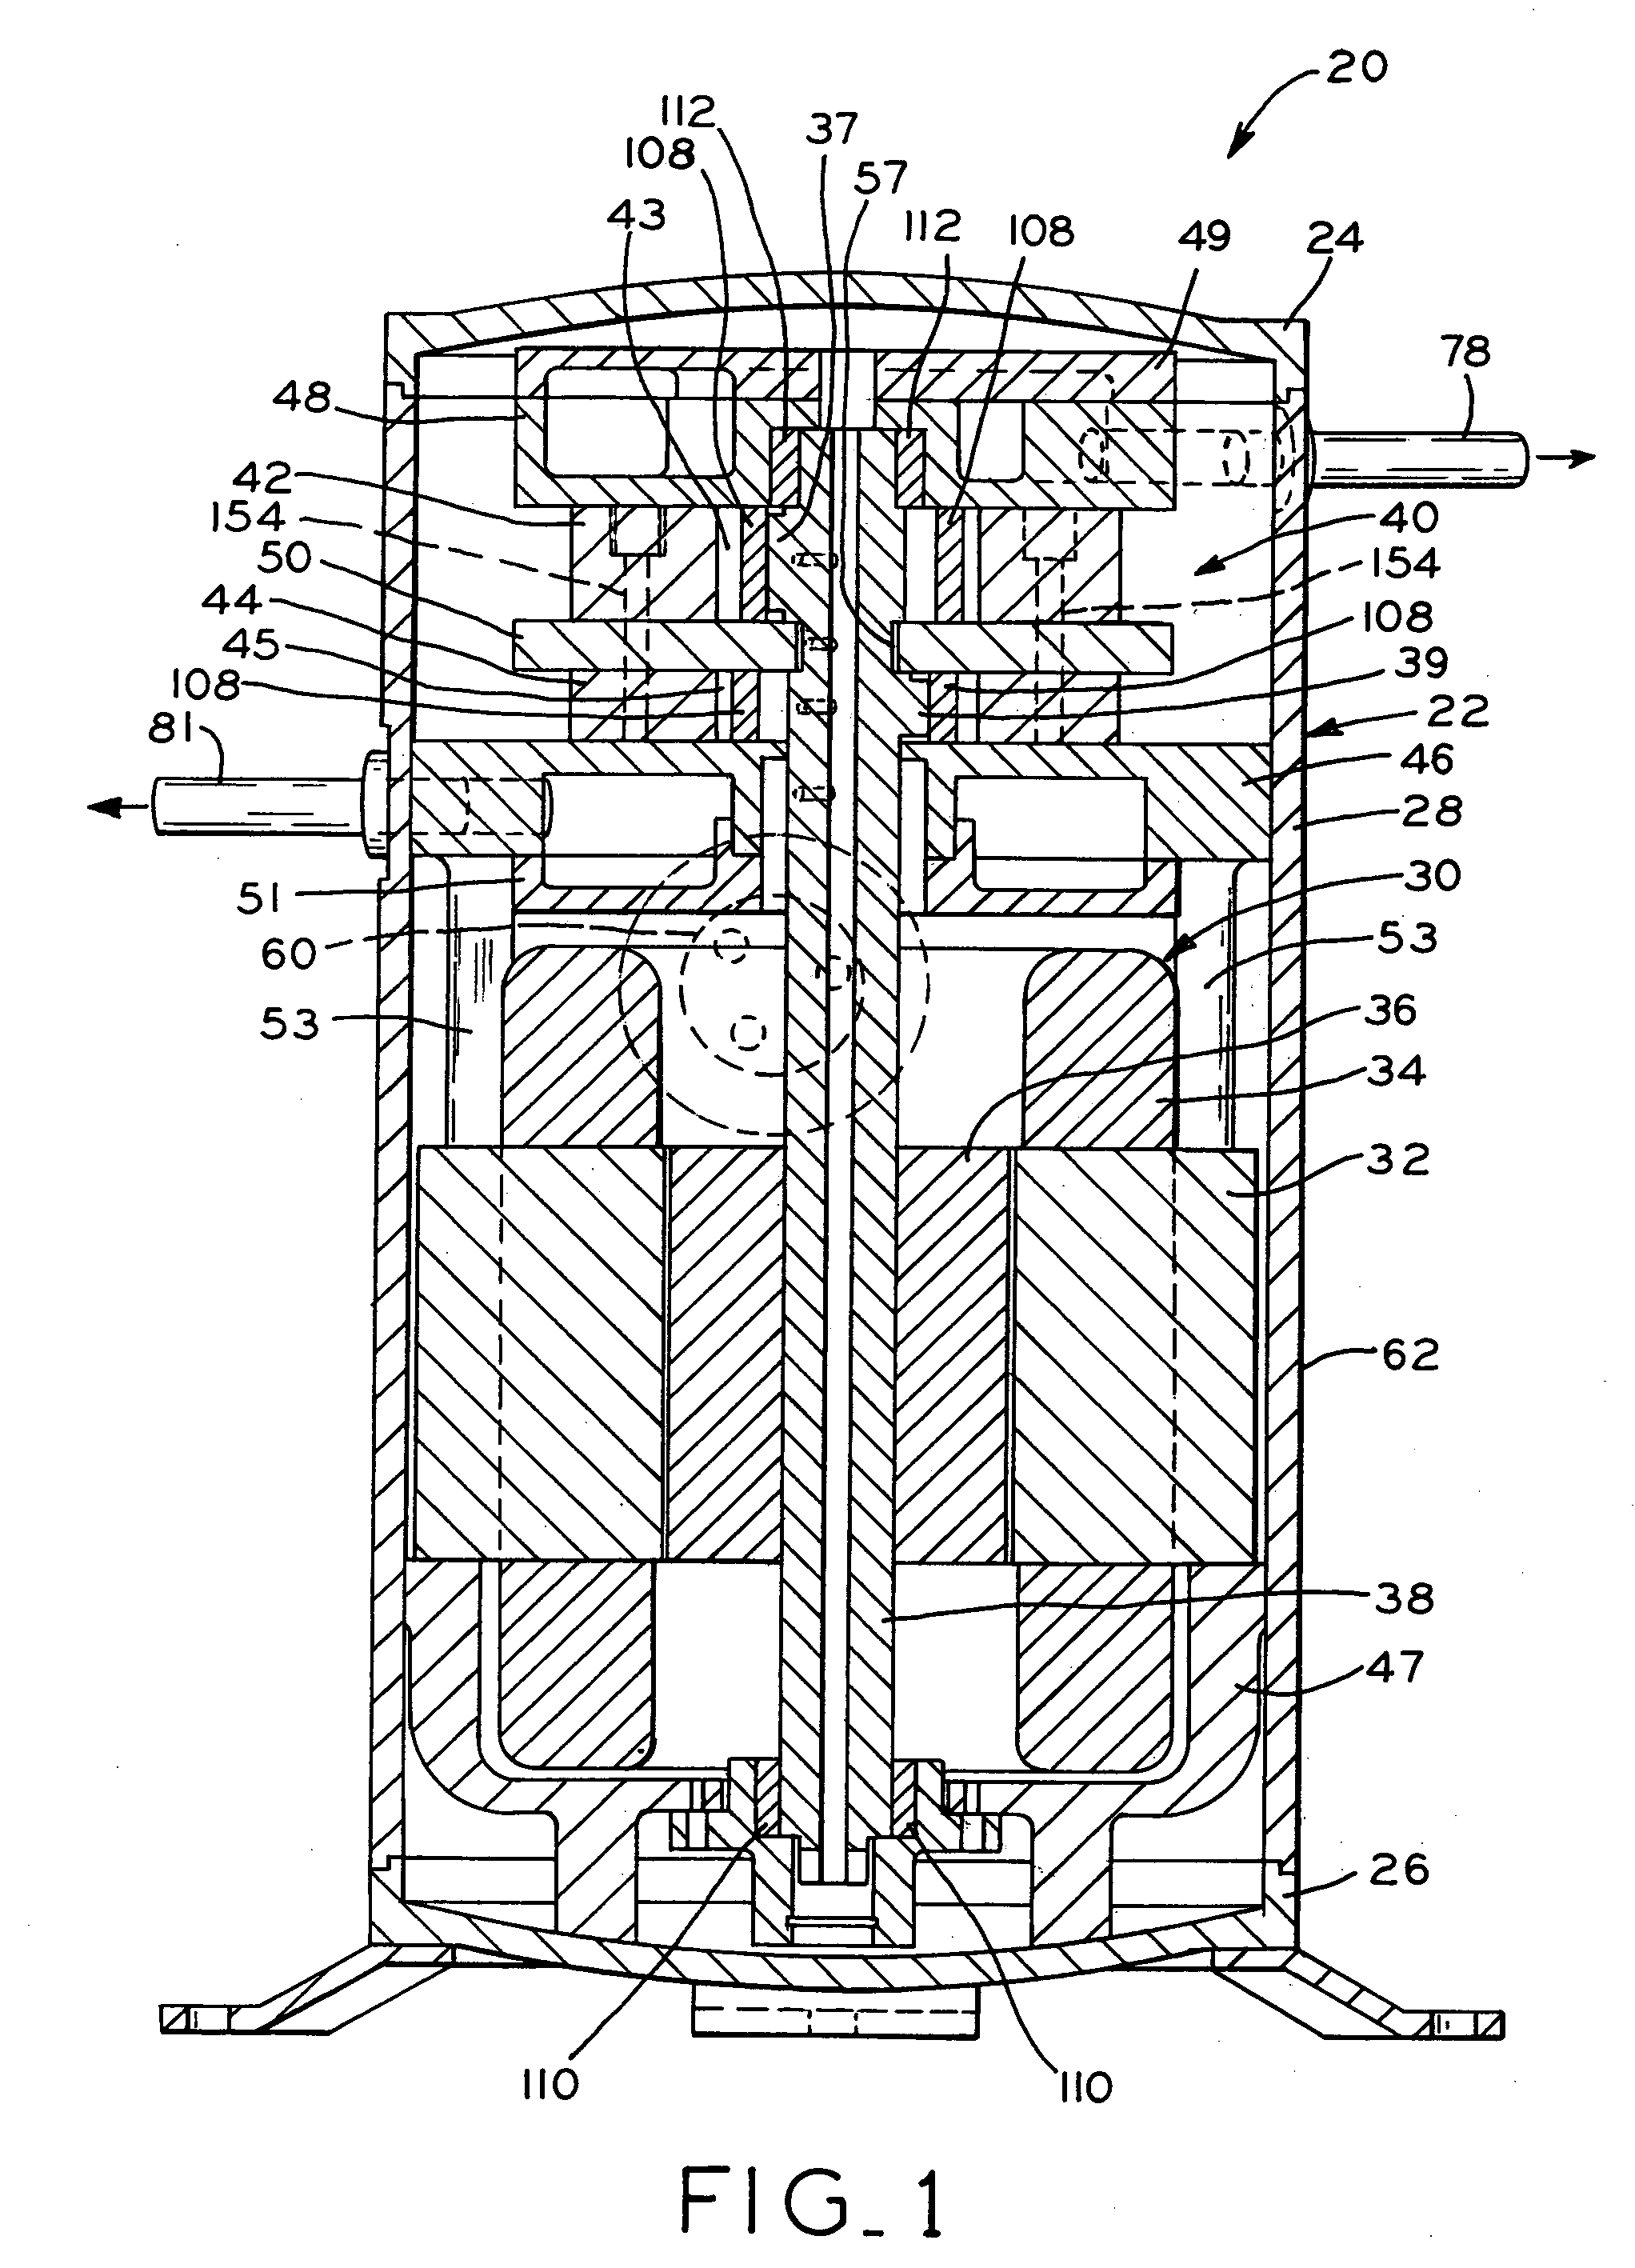 Terminal block assembly for a hermetic compressor